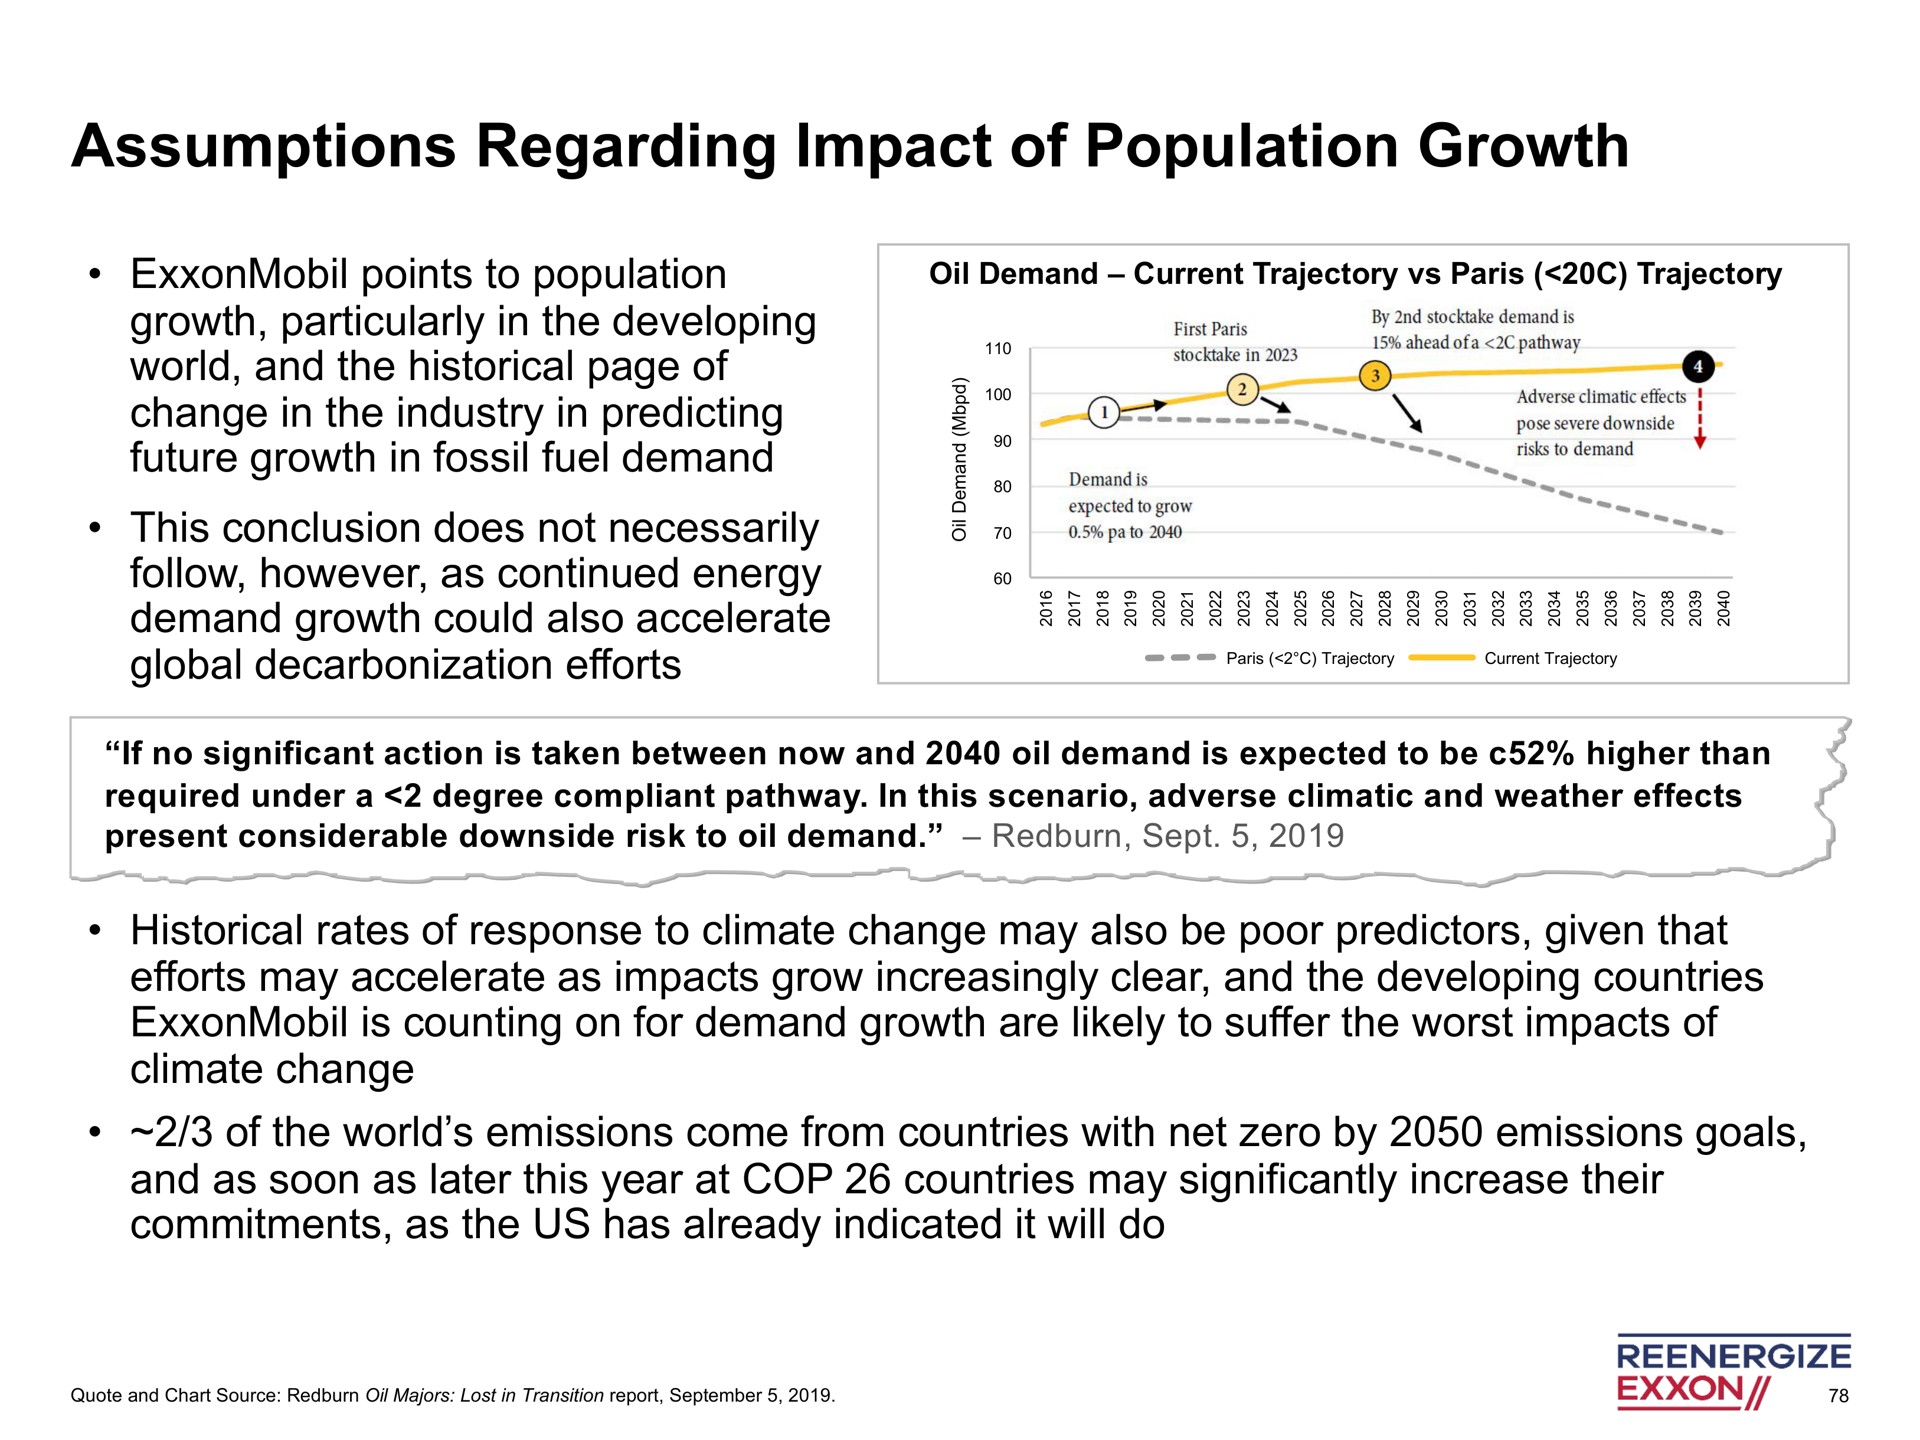 assumptions regarding impact of population growth world and the historical page change in the industry in predicting a | Engine No. 1